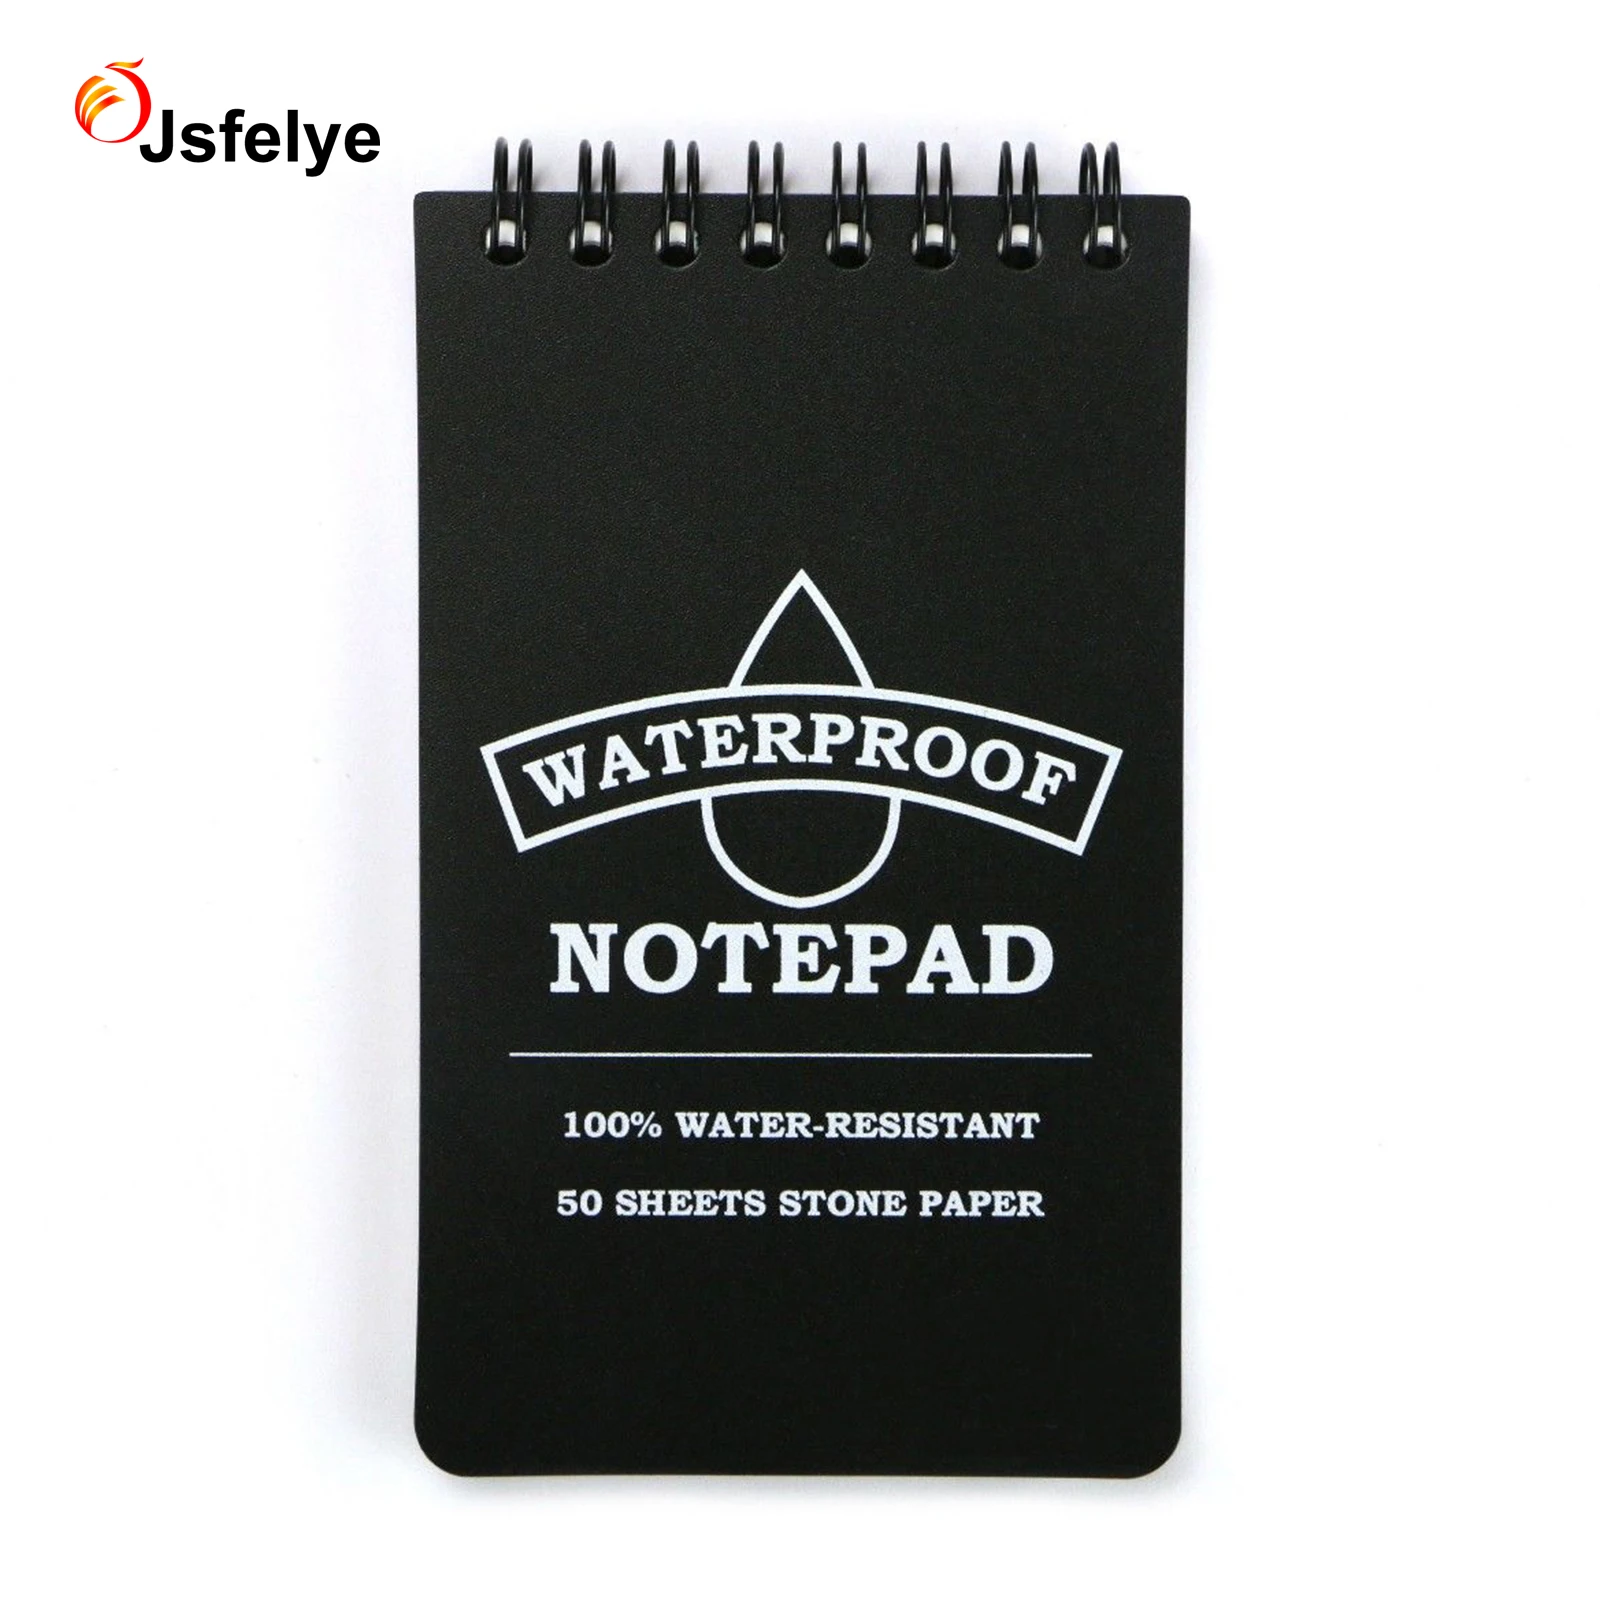 WATERPROOF NOTEPAD All Weather Stone Paper Pocket Size Notebook Outdoor Hiking 